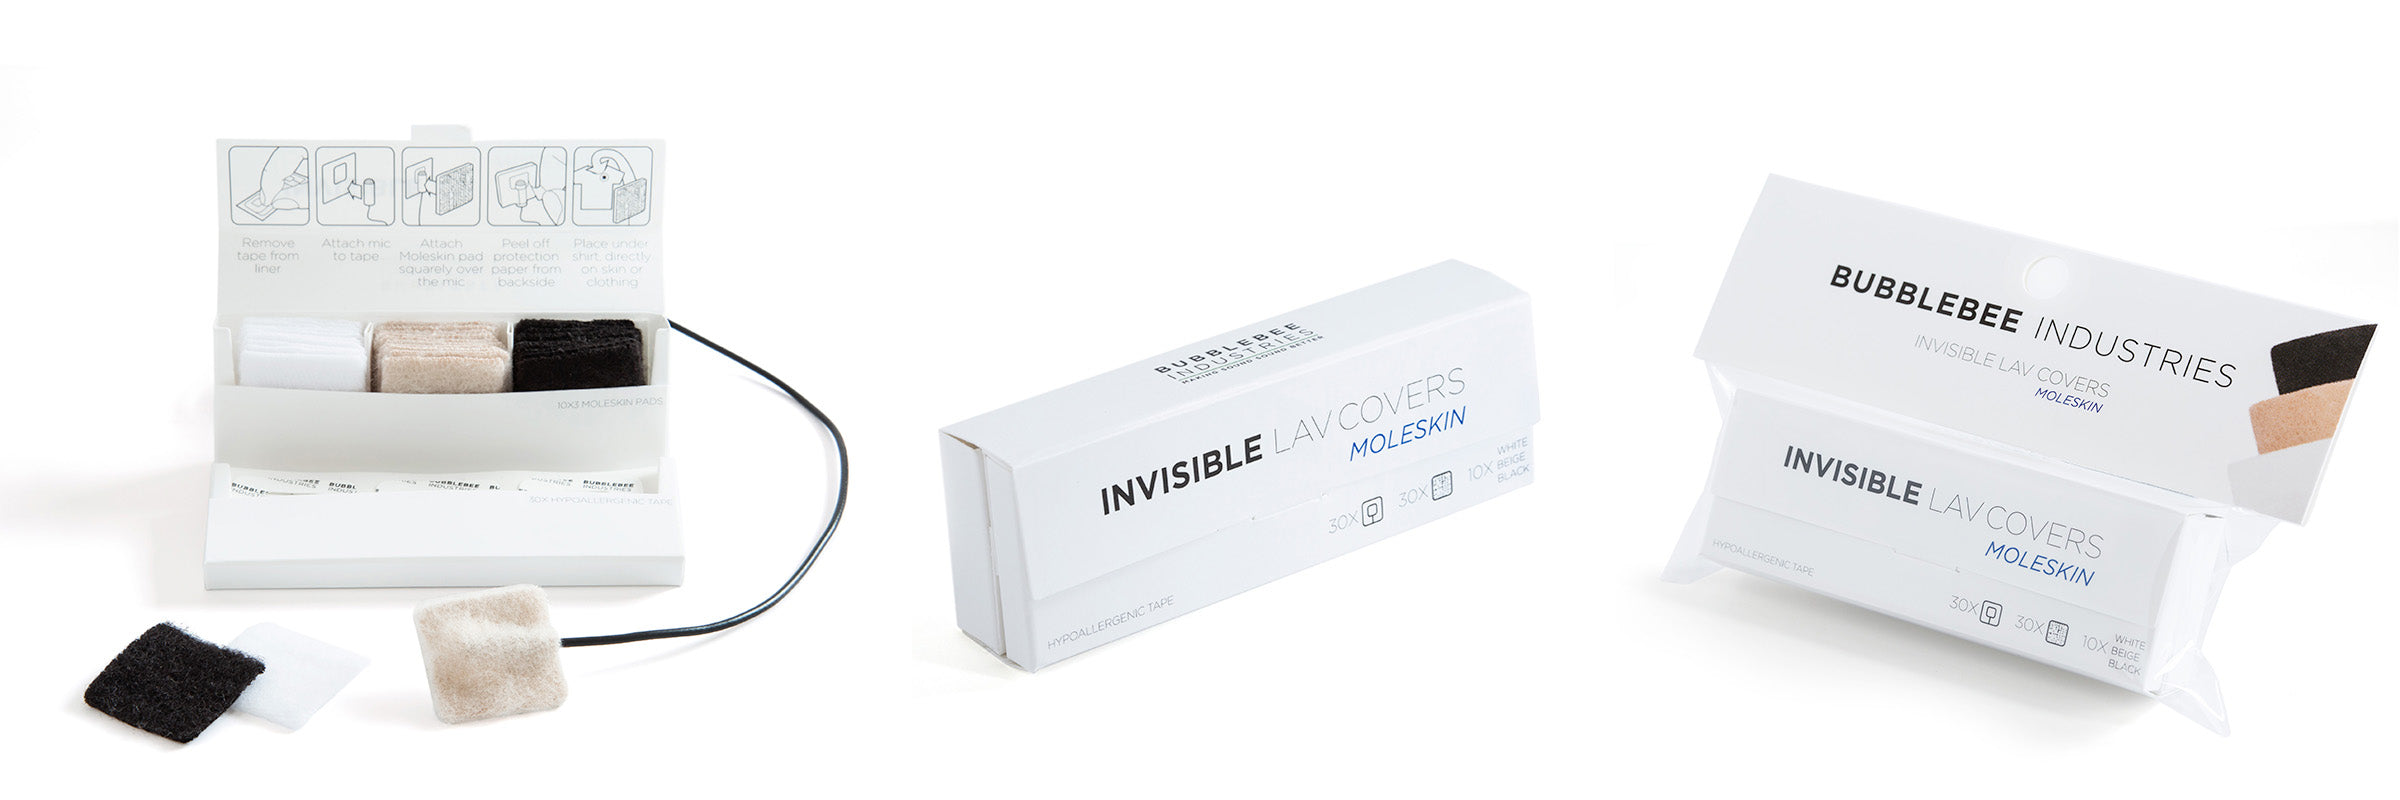 The Invisible Lav Covers - Moleskin banner